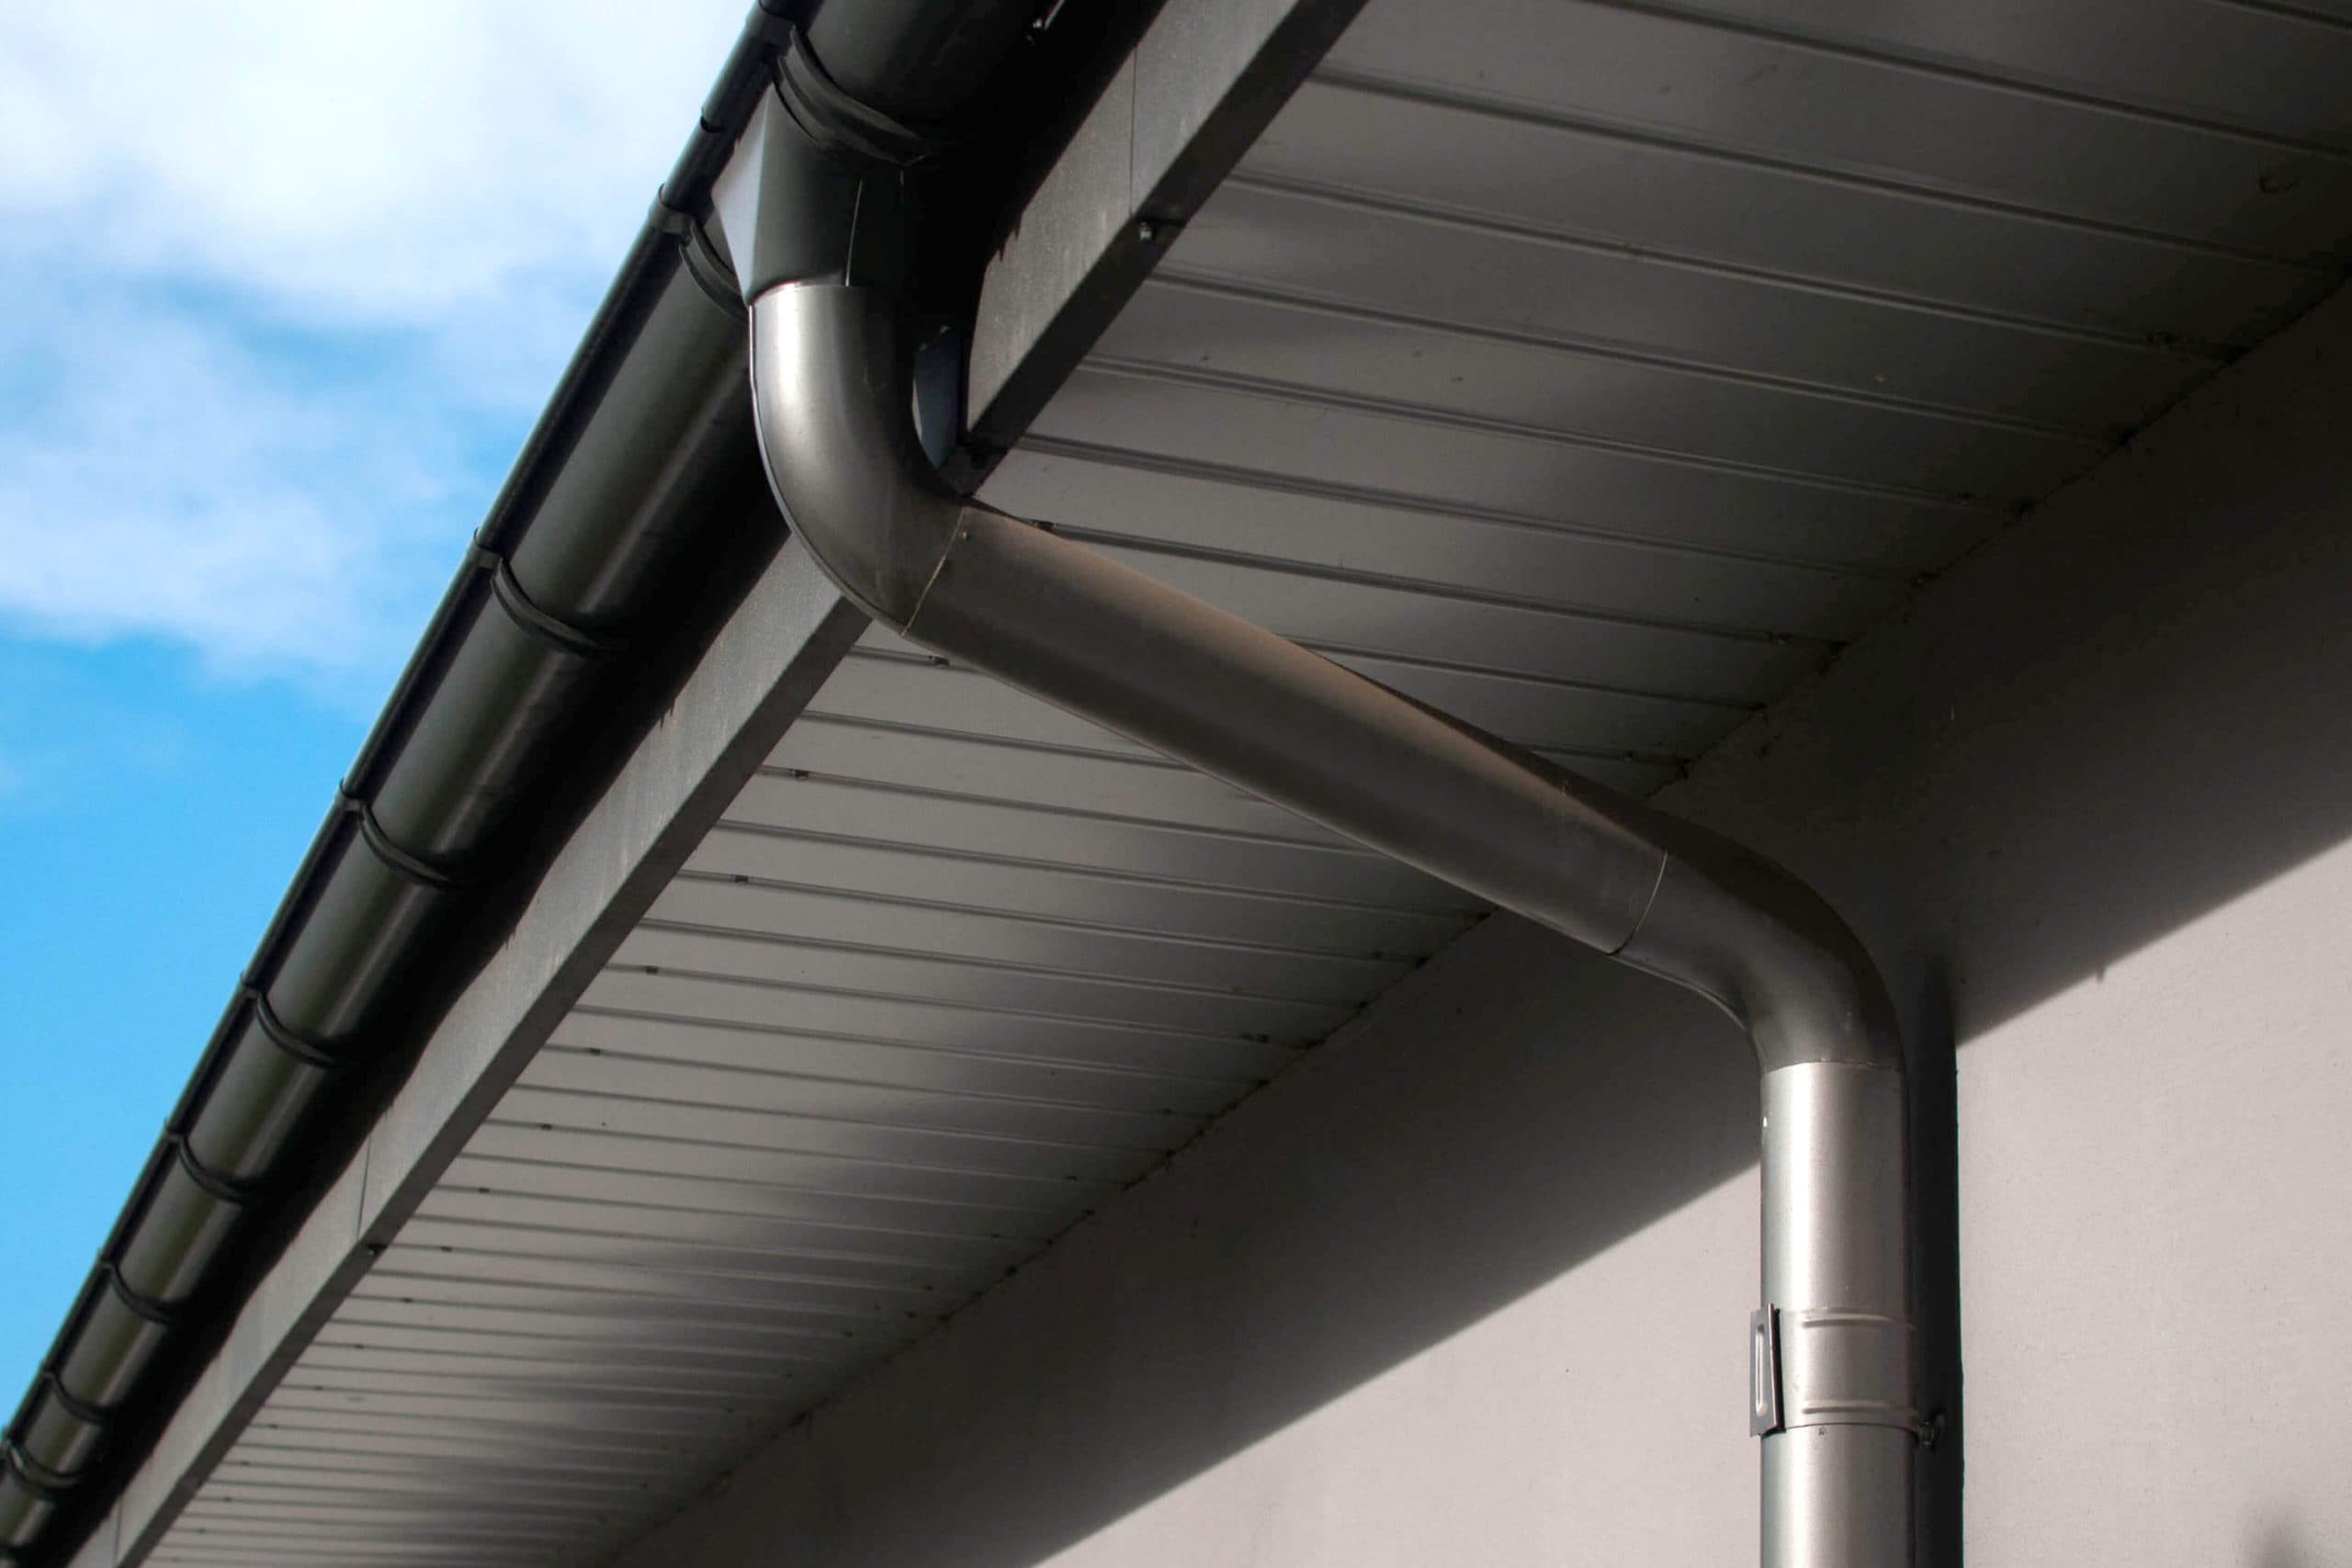 Corrosion-resistant galvanized gutters installed on a commercial building in Vancouver